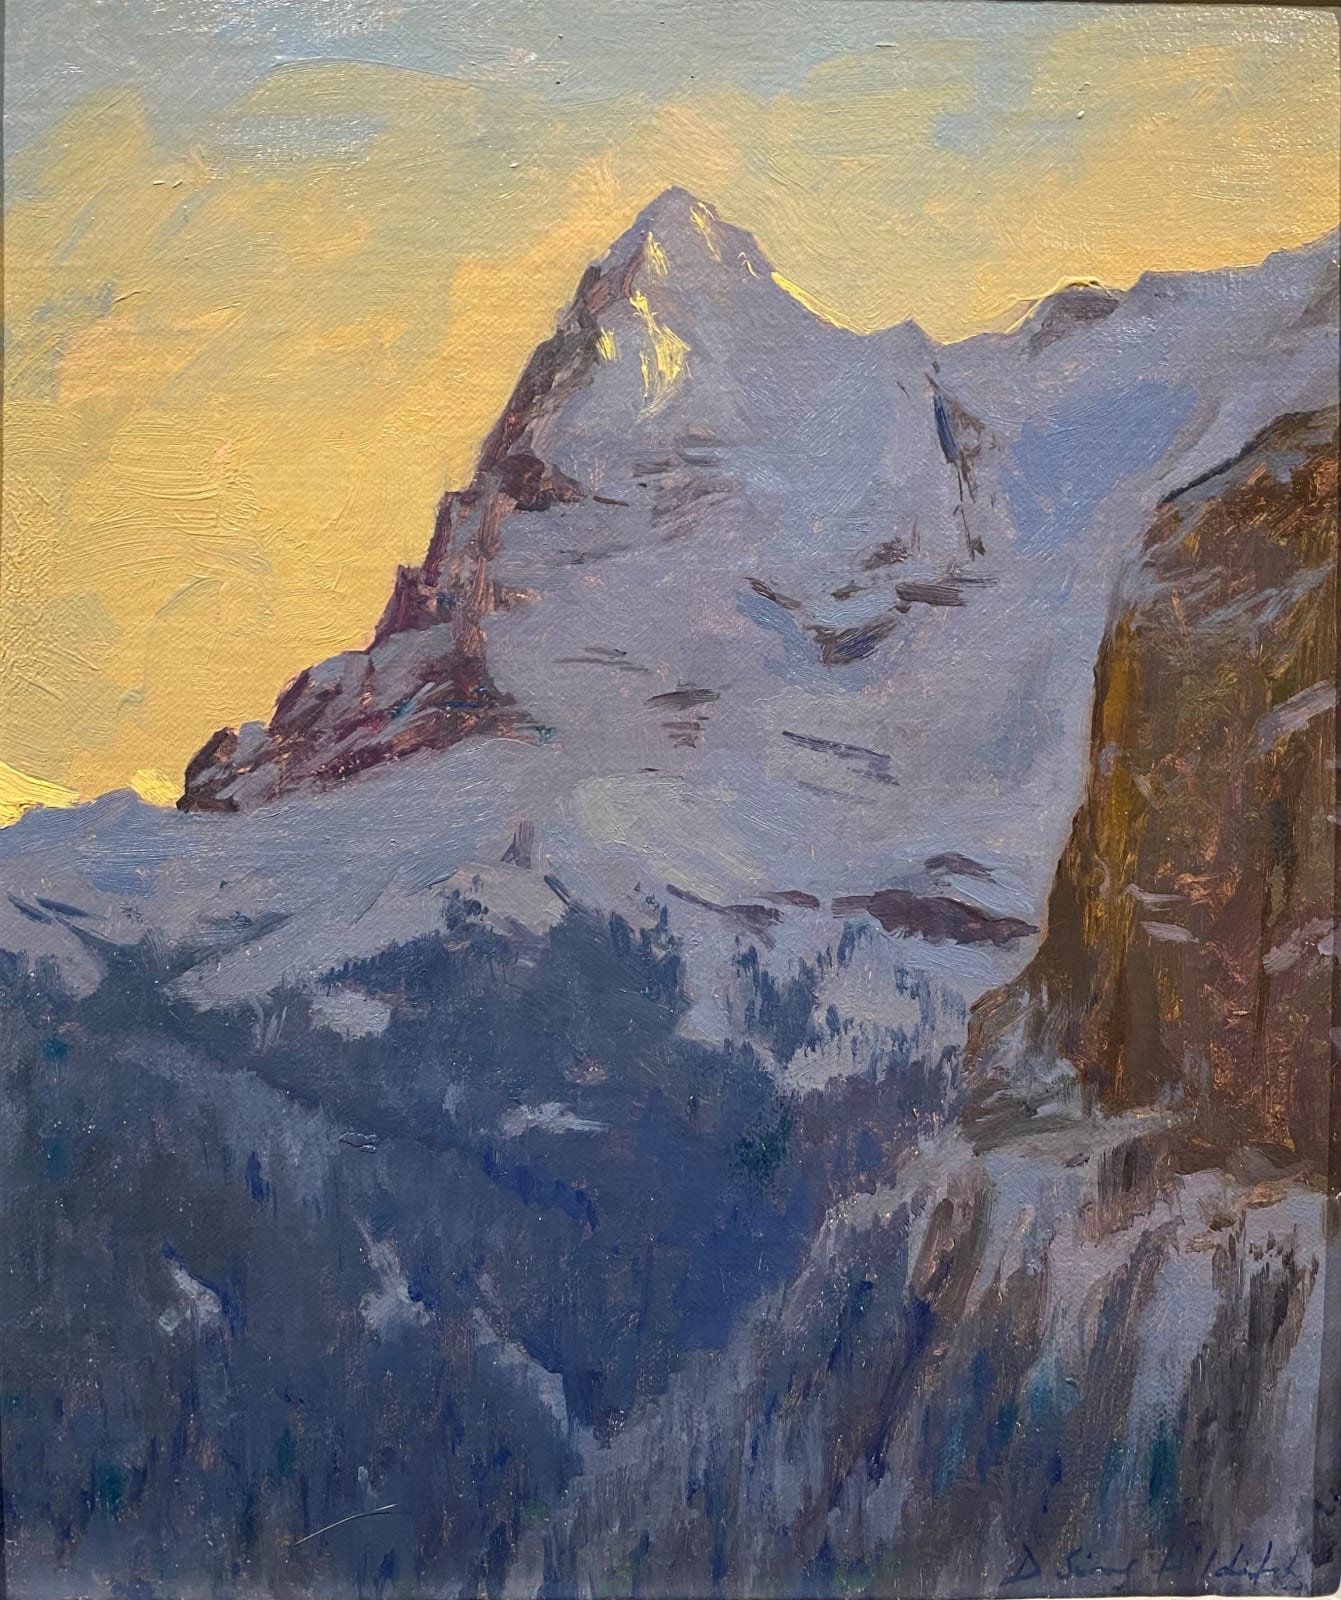 Daisy Sims Hilditch, Early light, The Eiger from Mürren